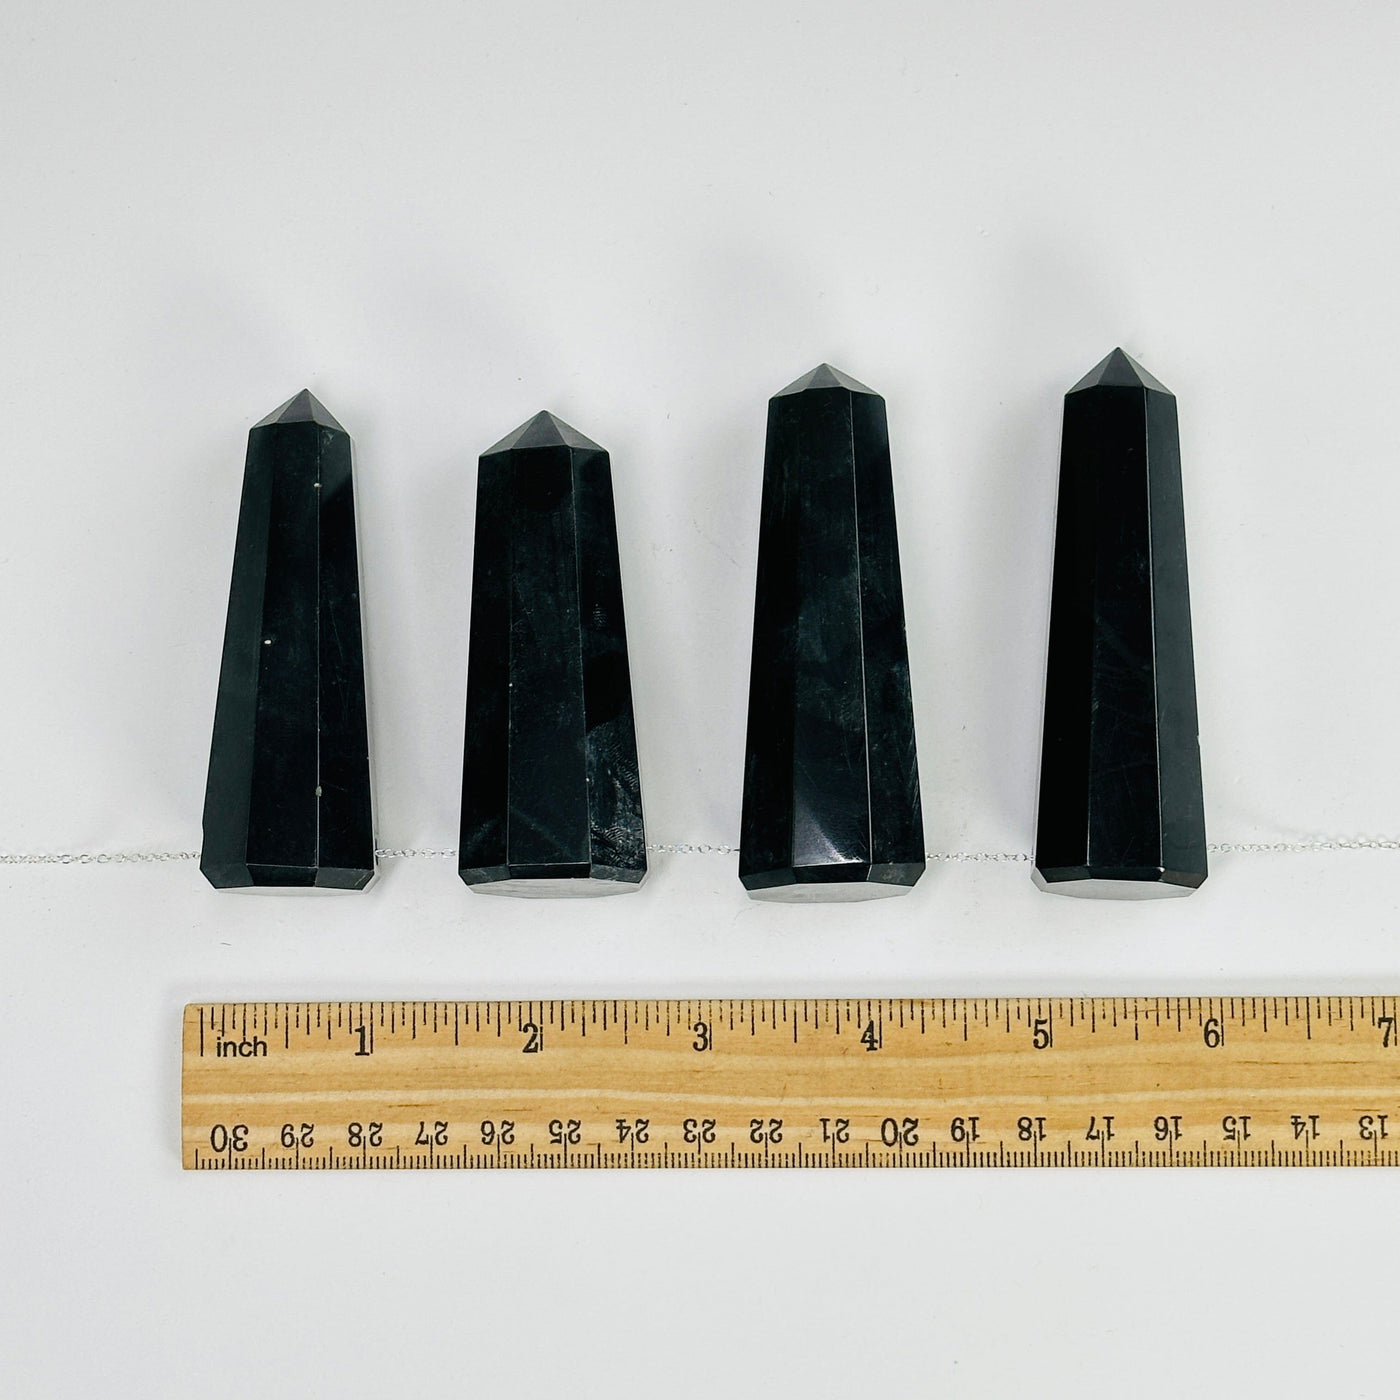 onyx obelisk points with a chain through them next to a ruler for size reference